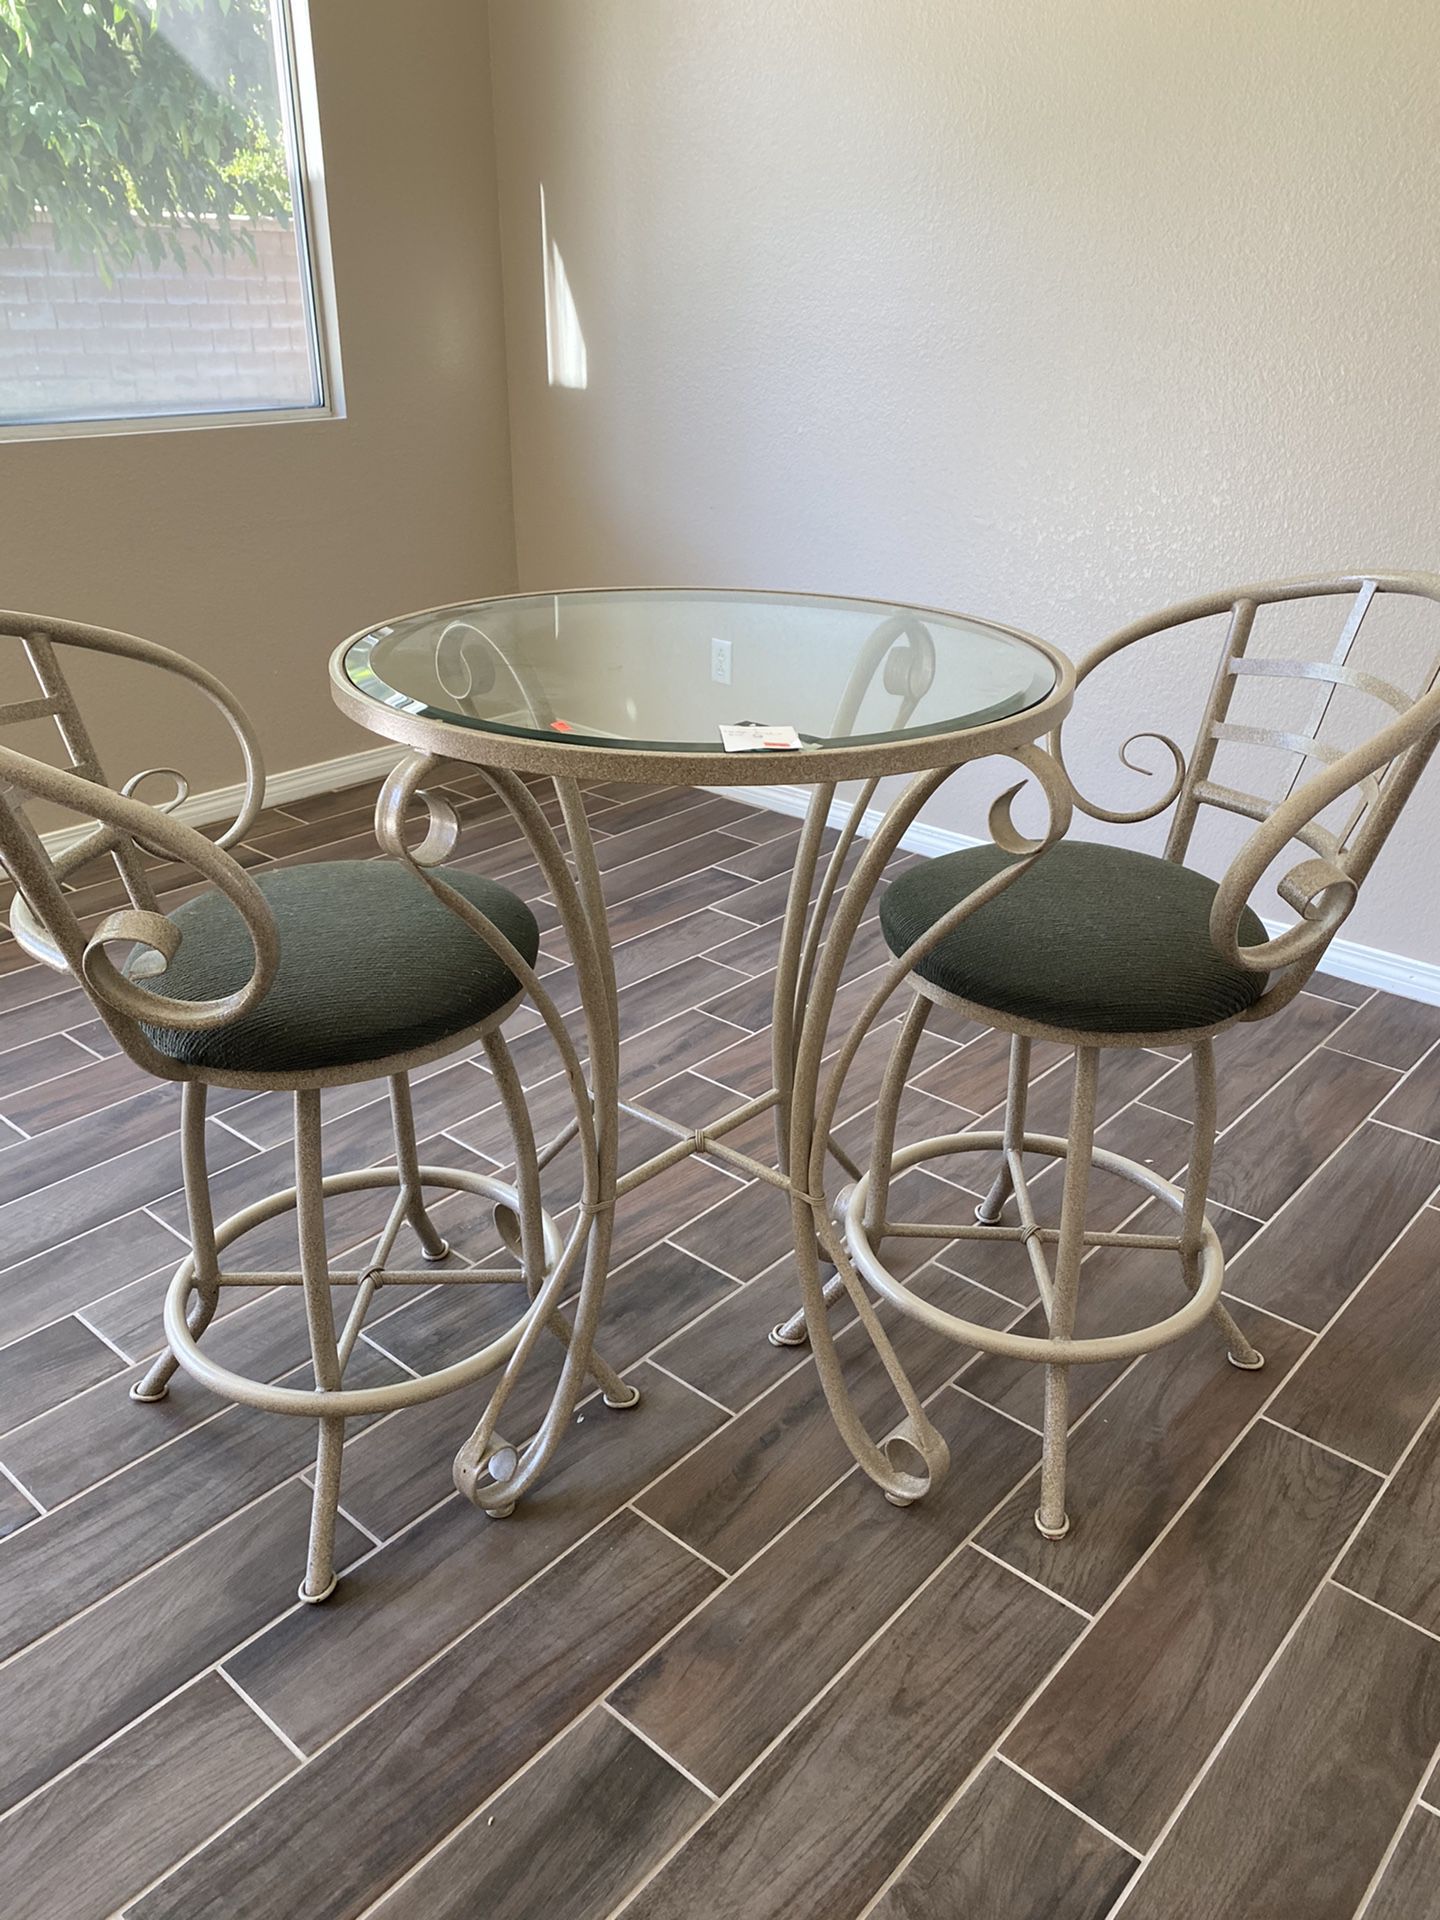 Glass Bistro Table And Chairs